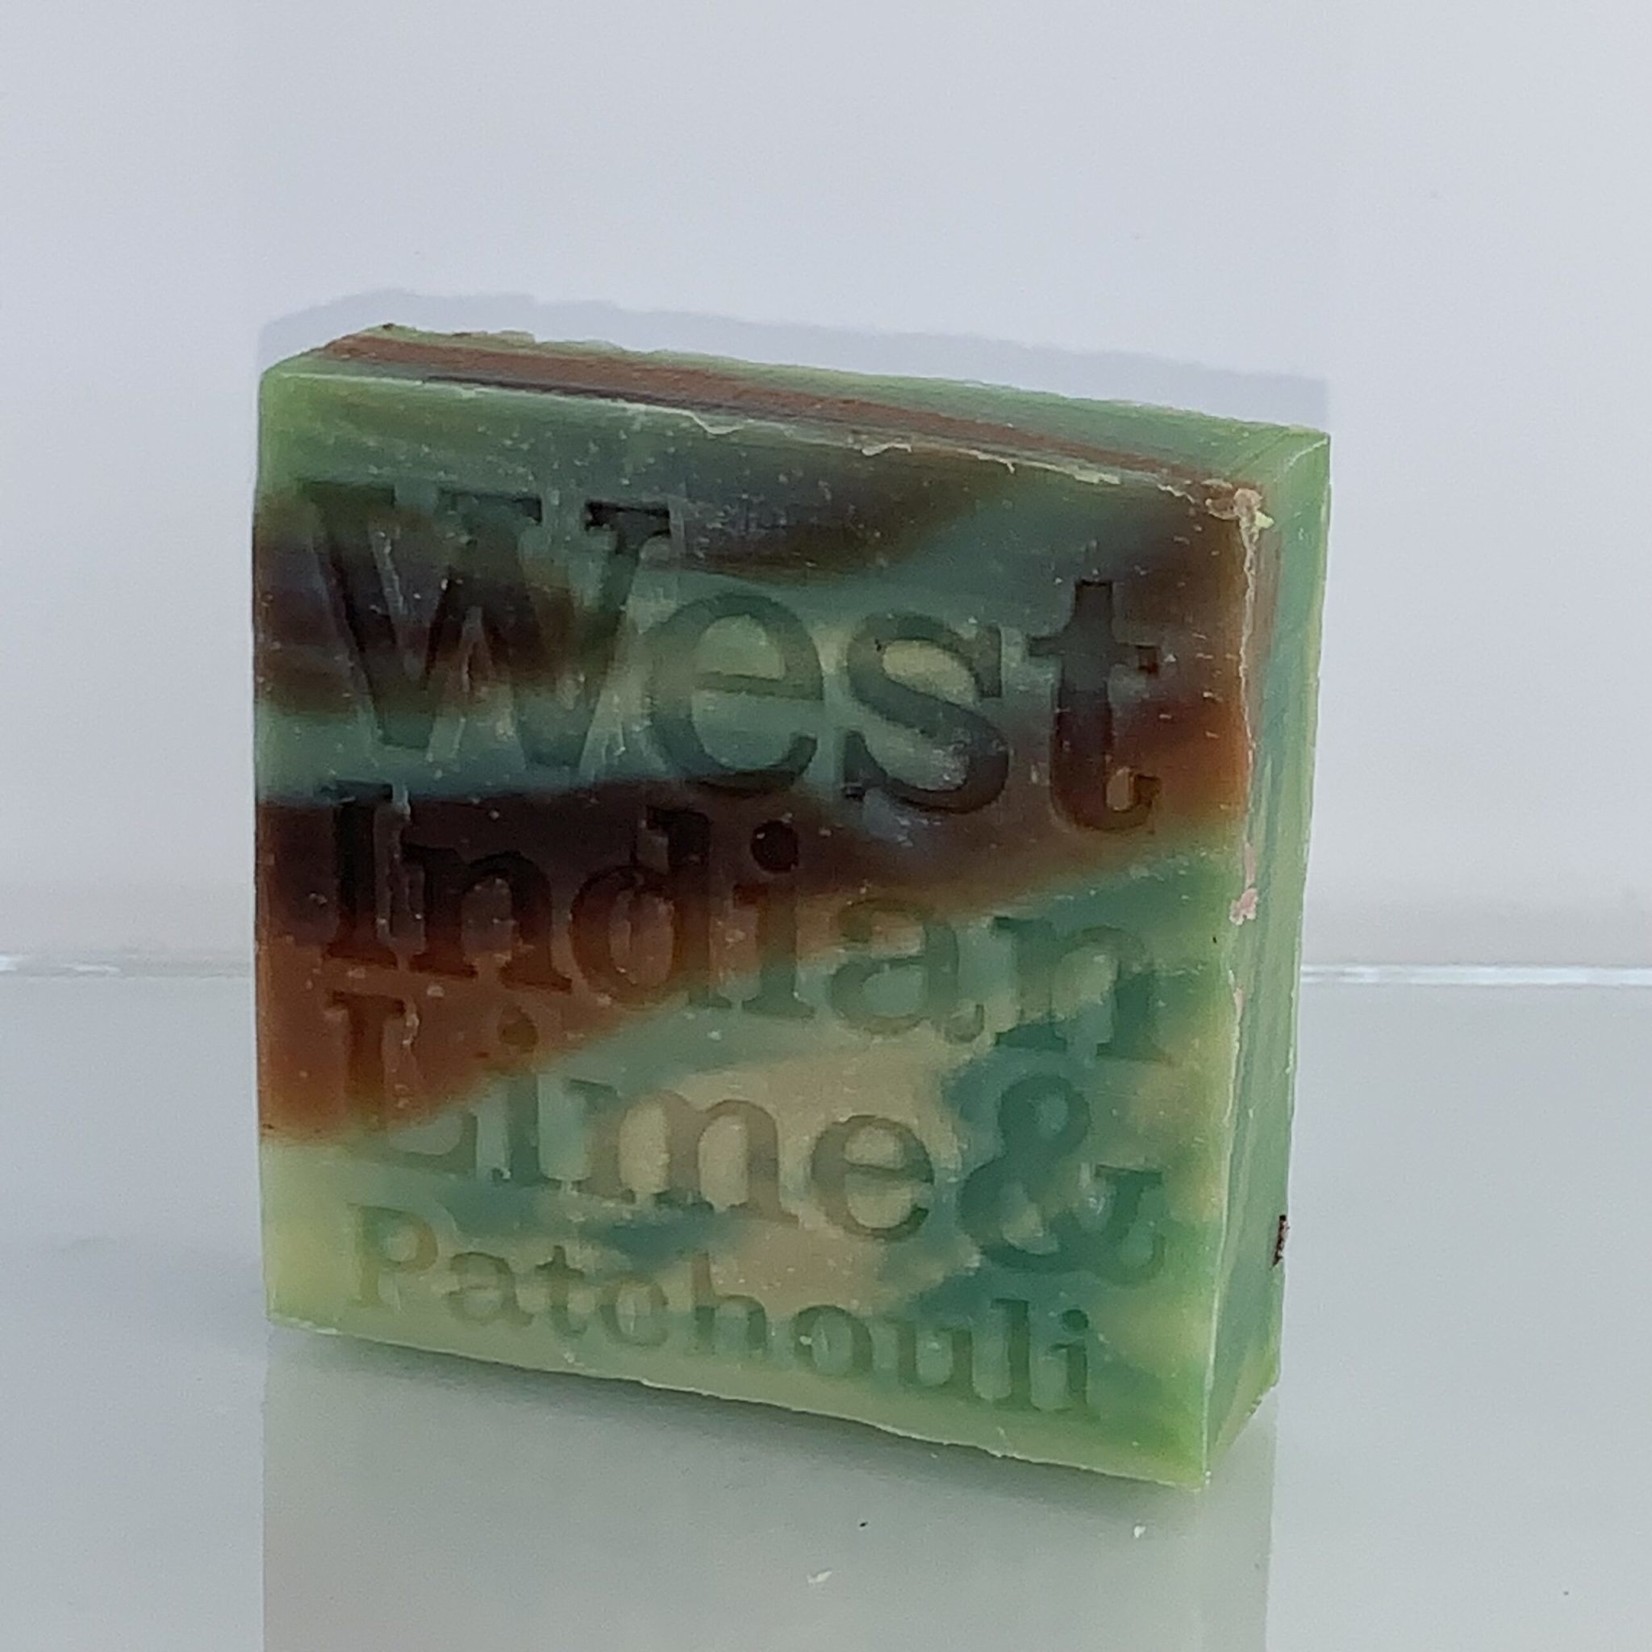 Corrynne's Corrynne's West Indian Lime & Patchouli Soap